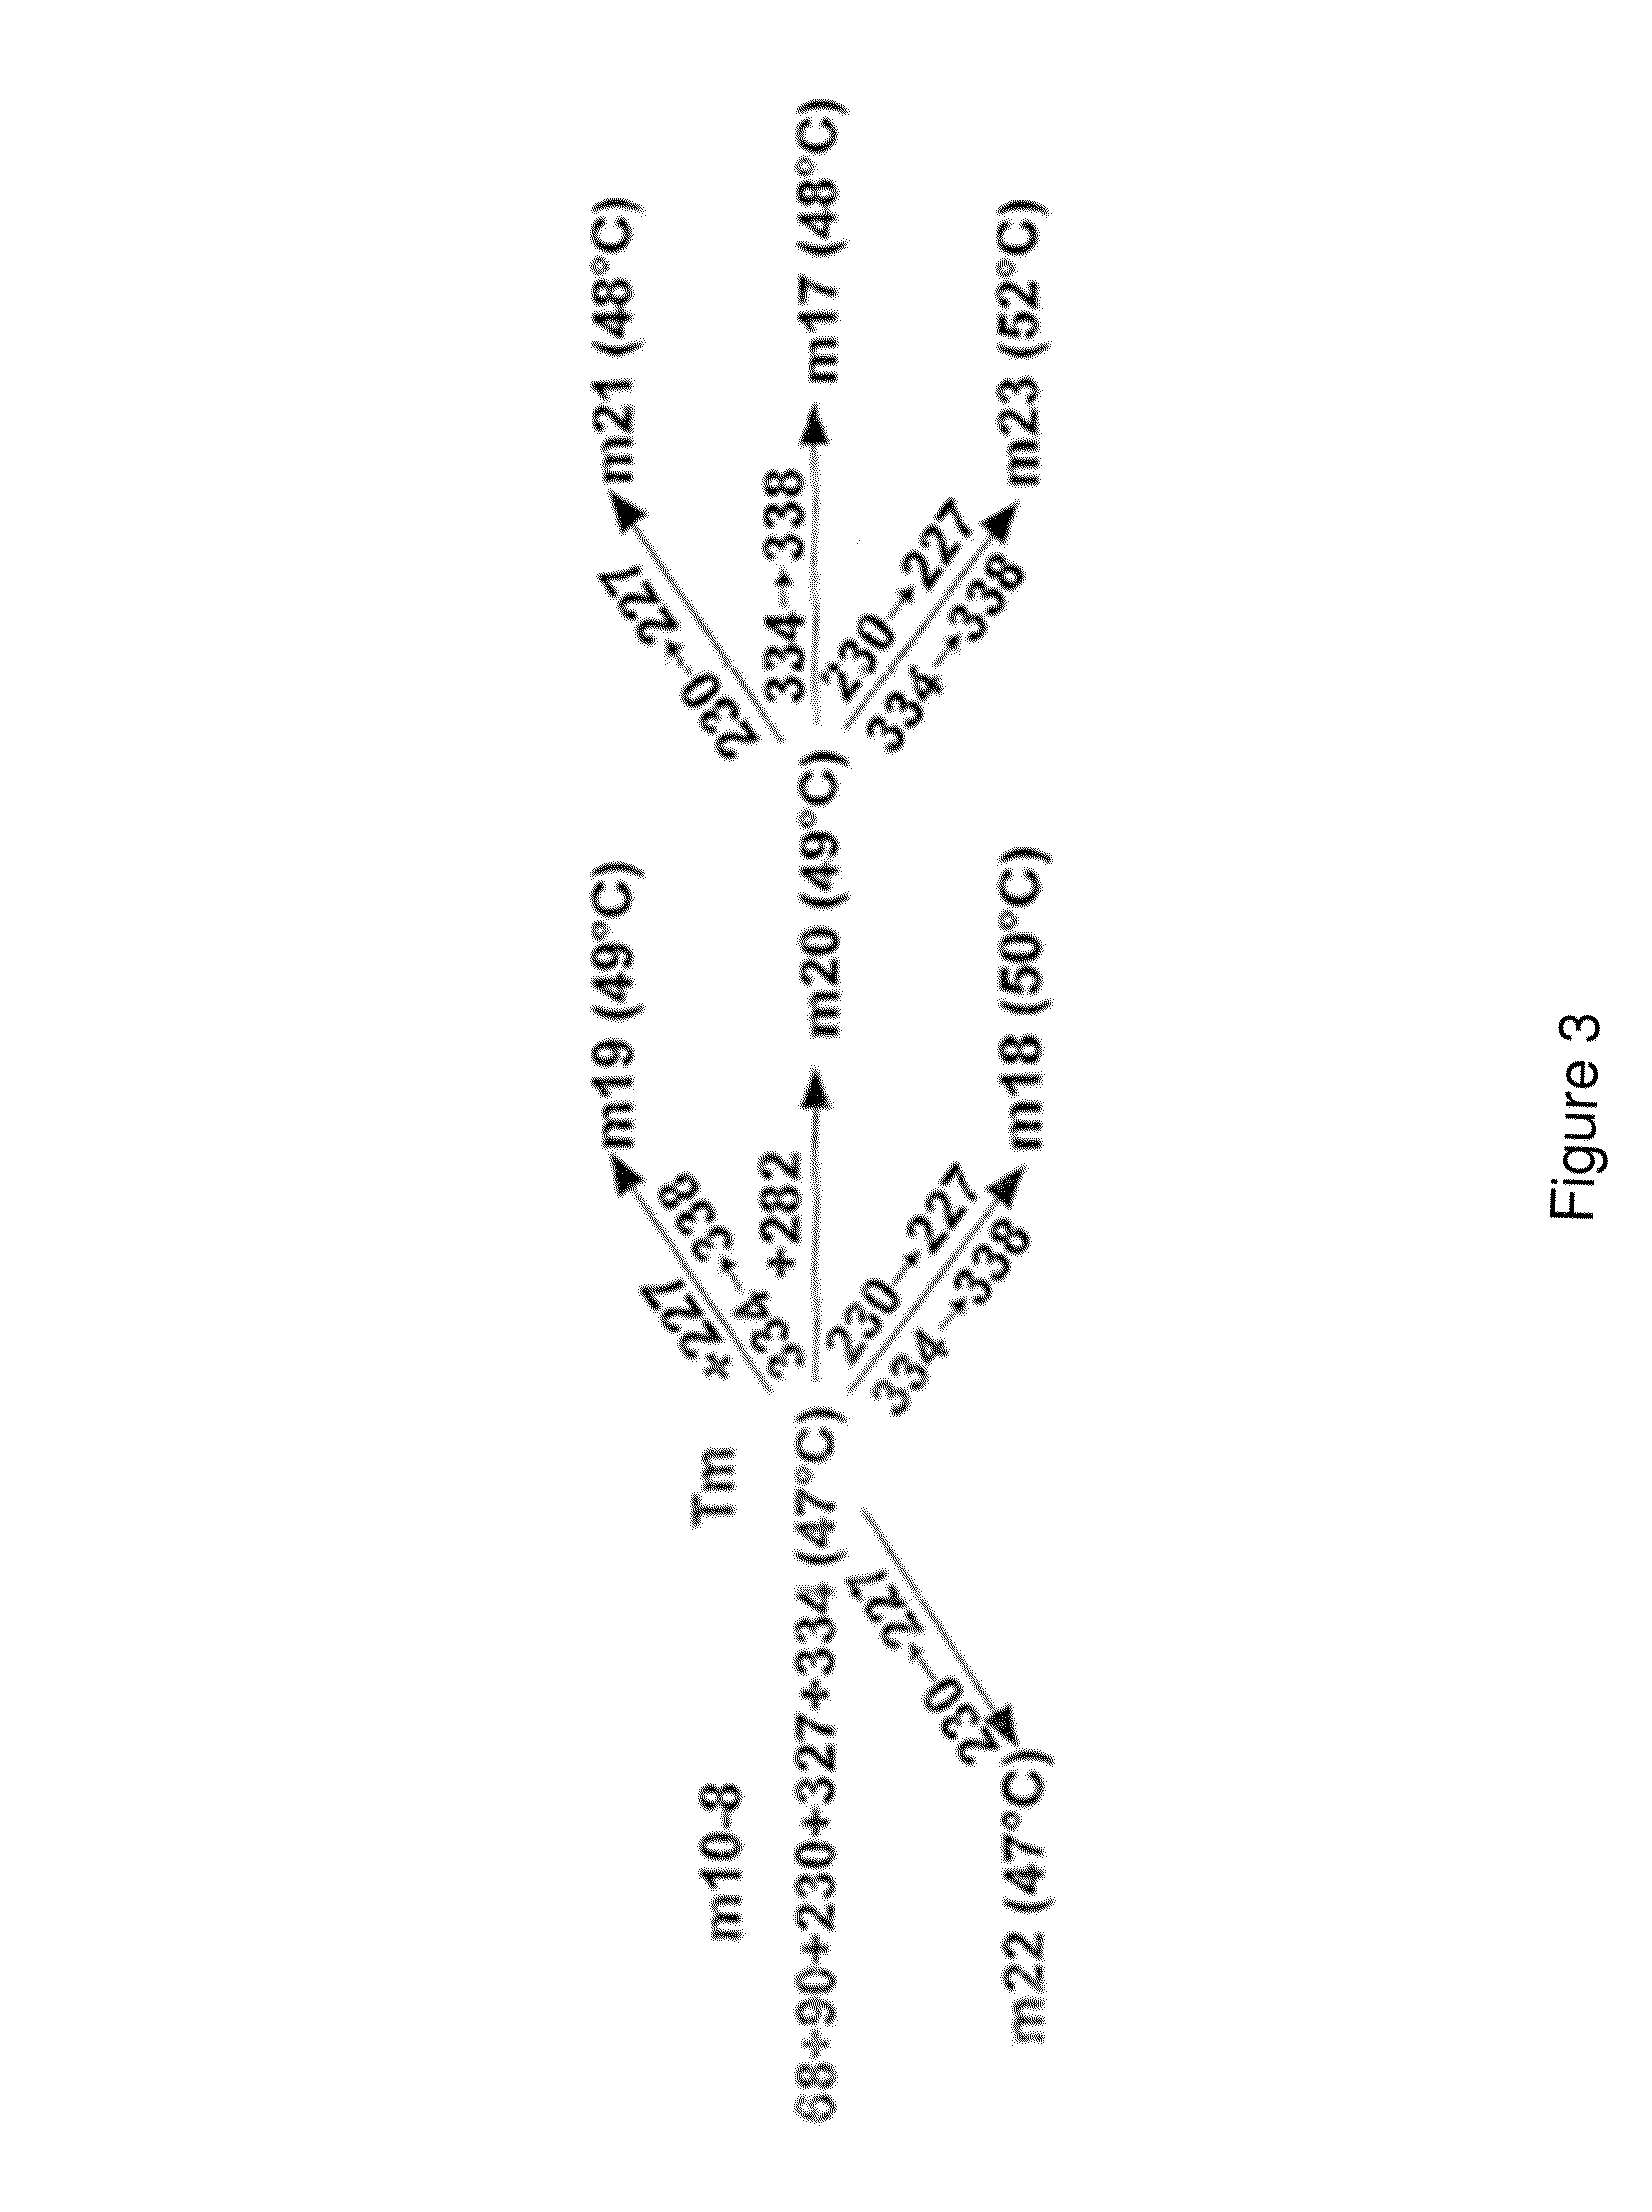 Methods for screening for binding partners of G-protein coupled receptors